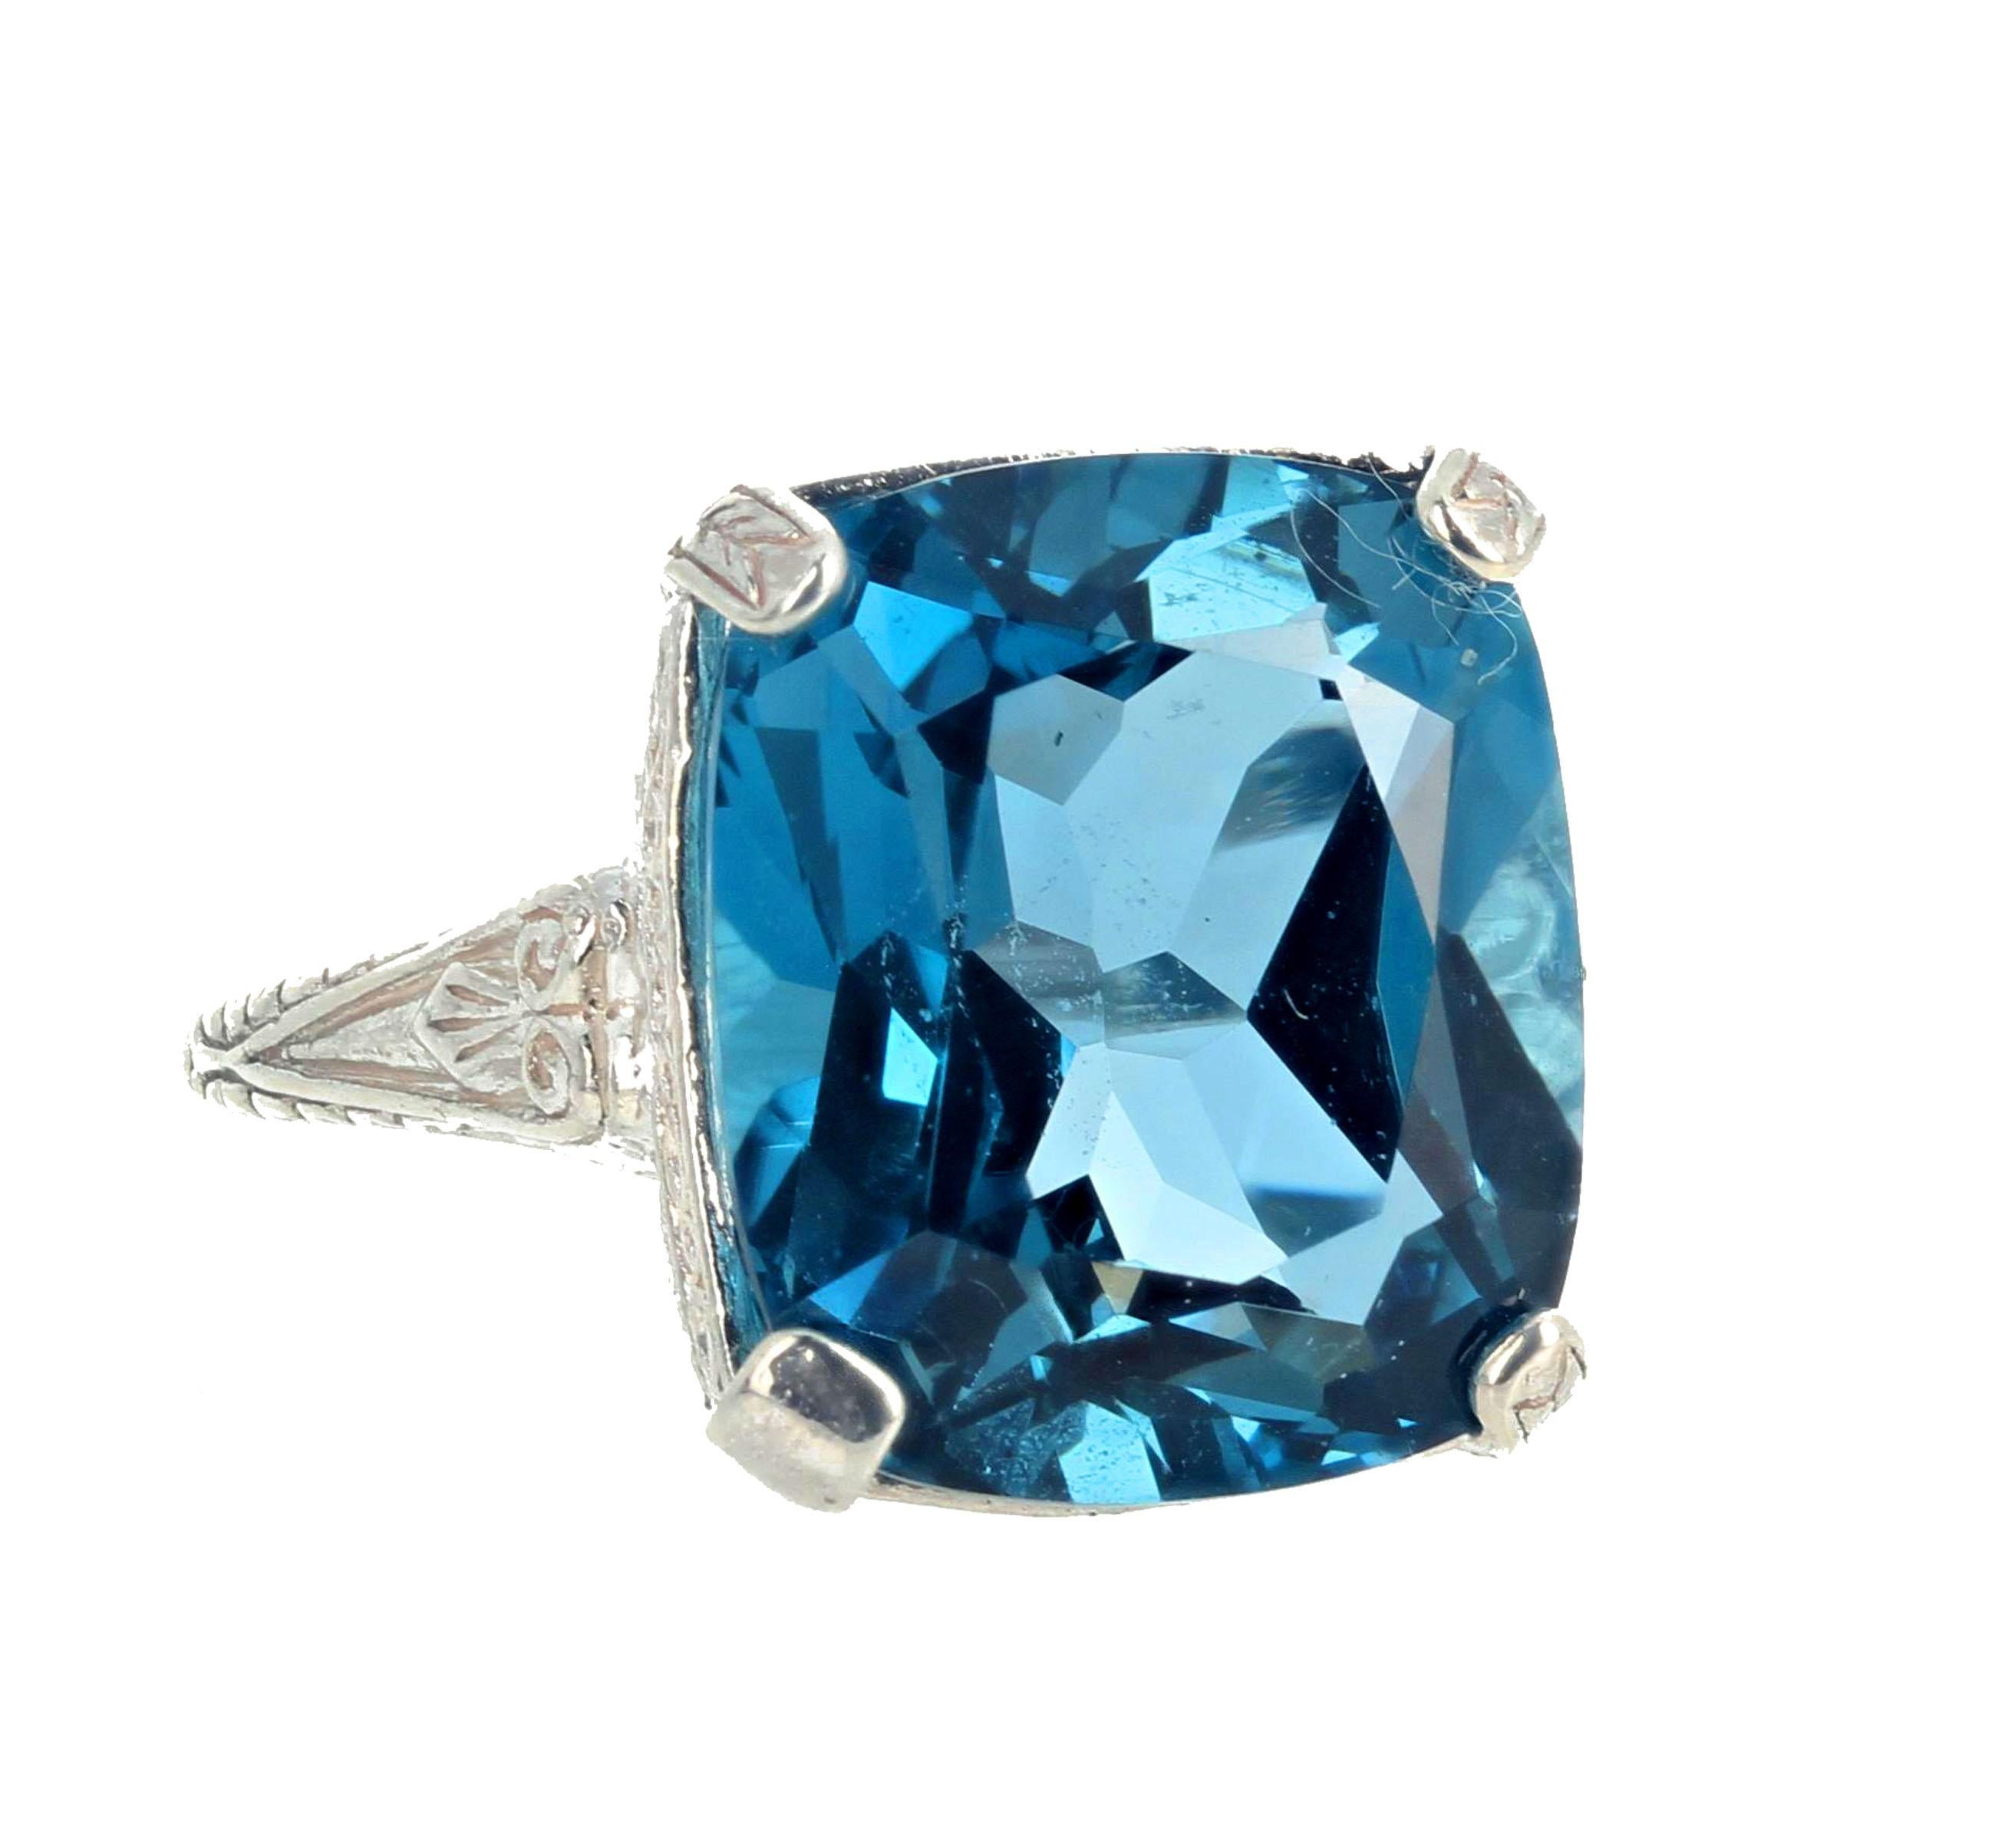 This stunning intensely London blue 11.65 carat Topaz (14mm x 12 mm) classic solitaire ring is truly dazzling.  You won't believe how much this gemstone sparkles.  It is set in a sterling silver ring size 7 (sizable).  This is the perfect gift to